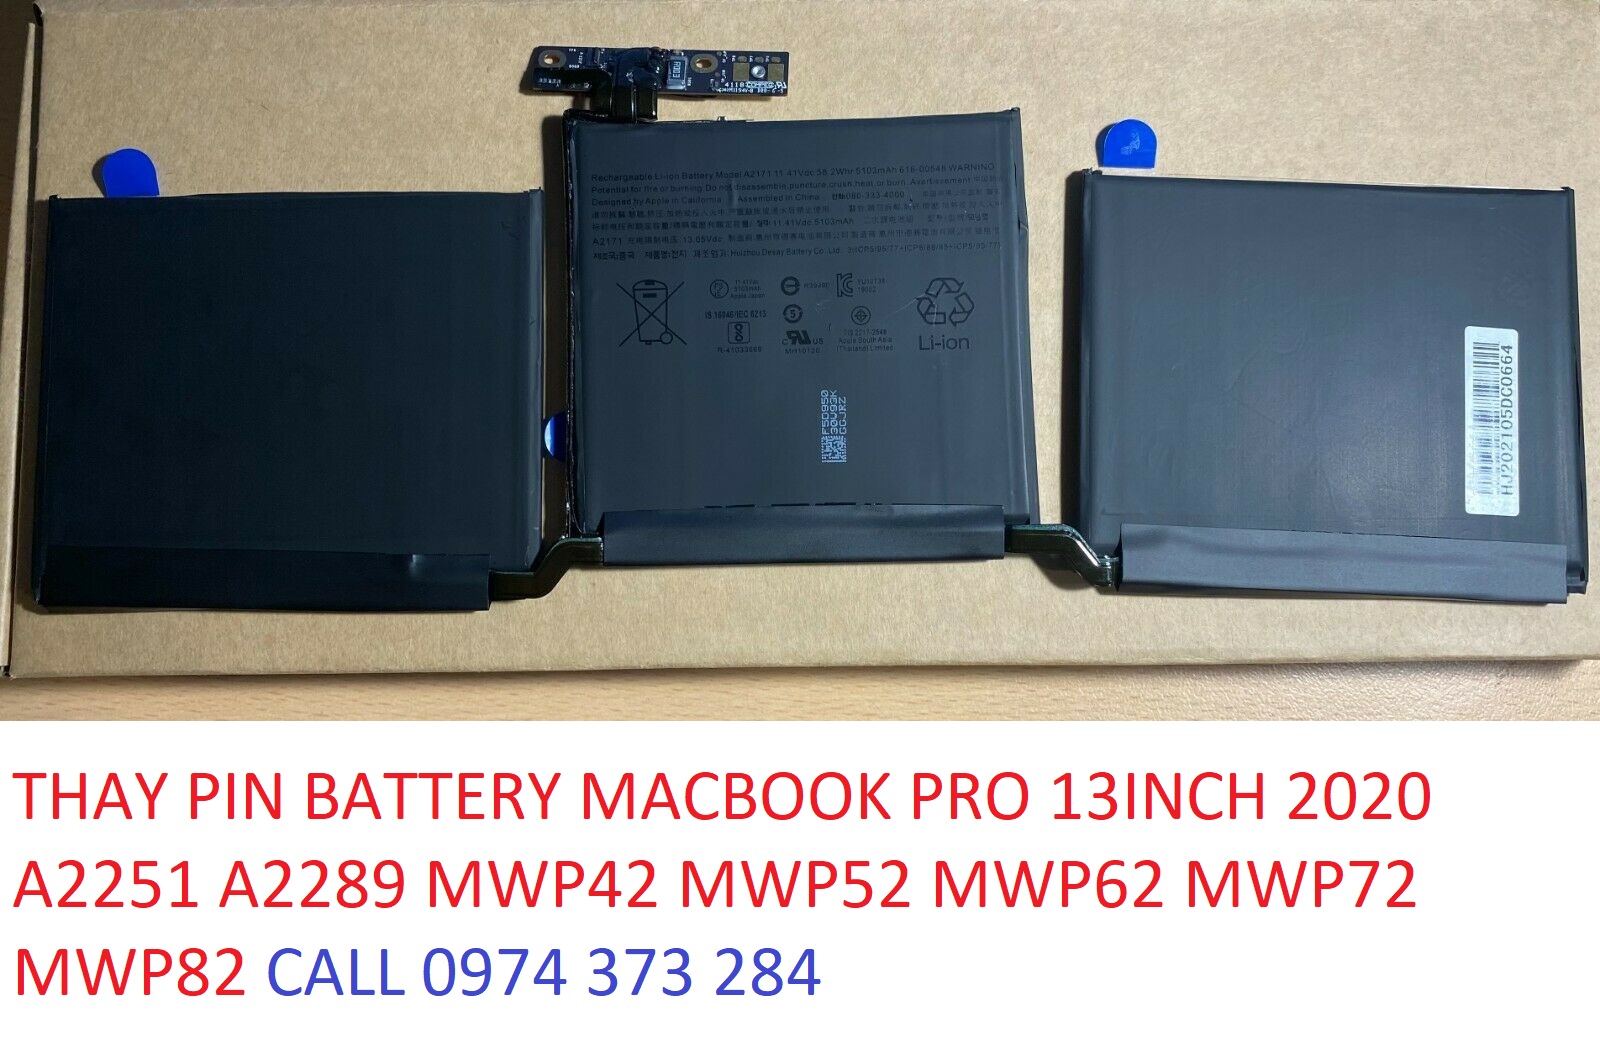 THAY PIN BATTERY MACBOOK PRO 13INCH 2020 A2251 A2289 MWP42 MWP52 MWP62 MWP72 MWP82